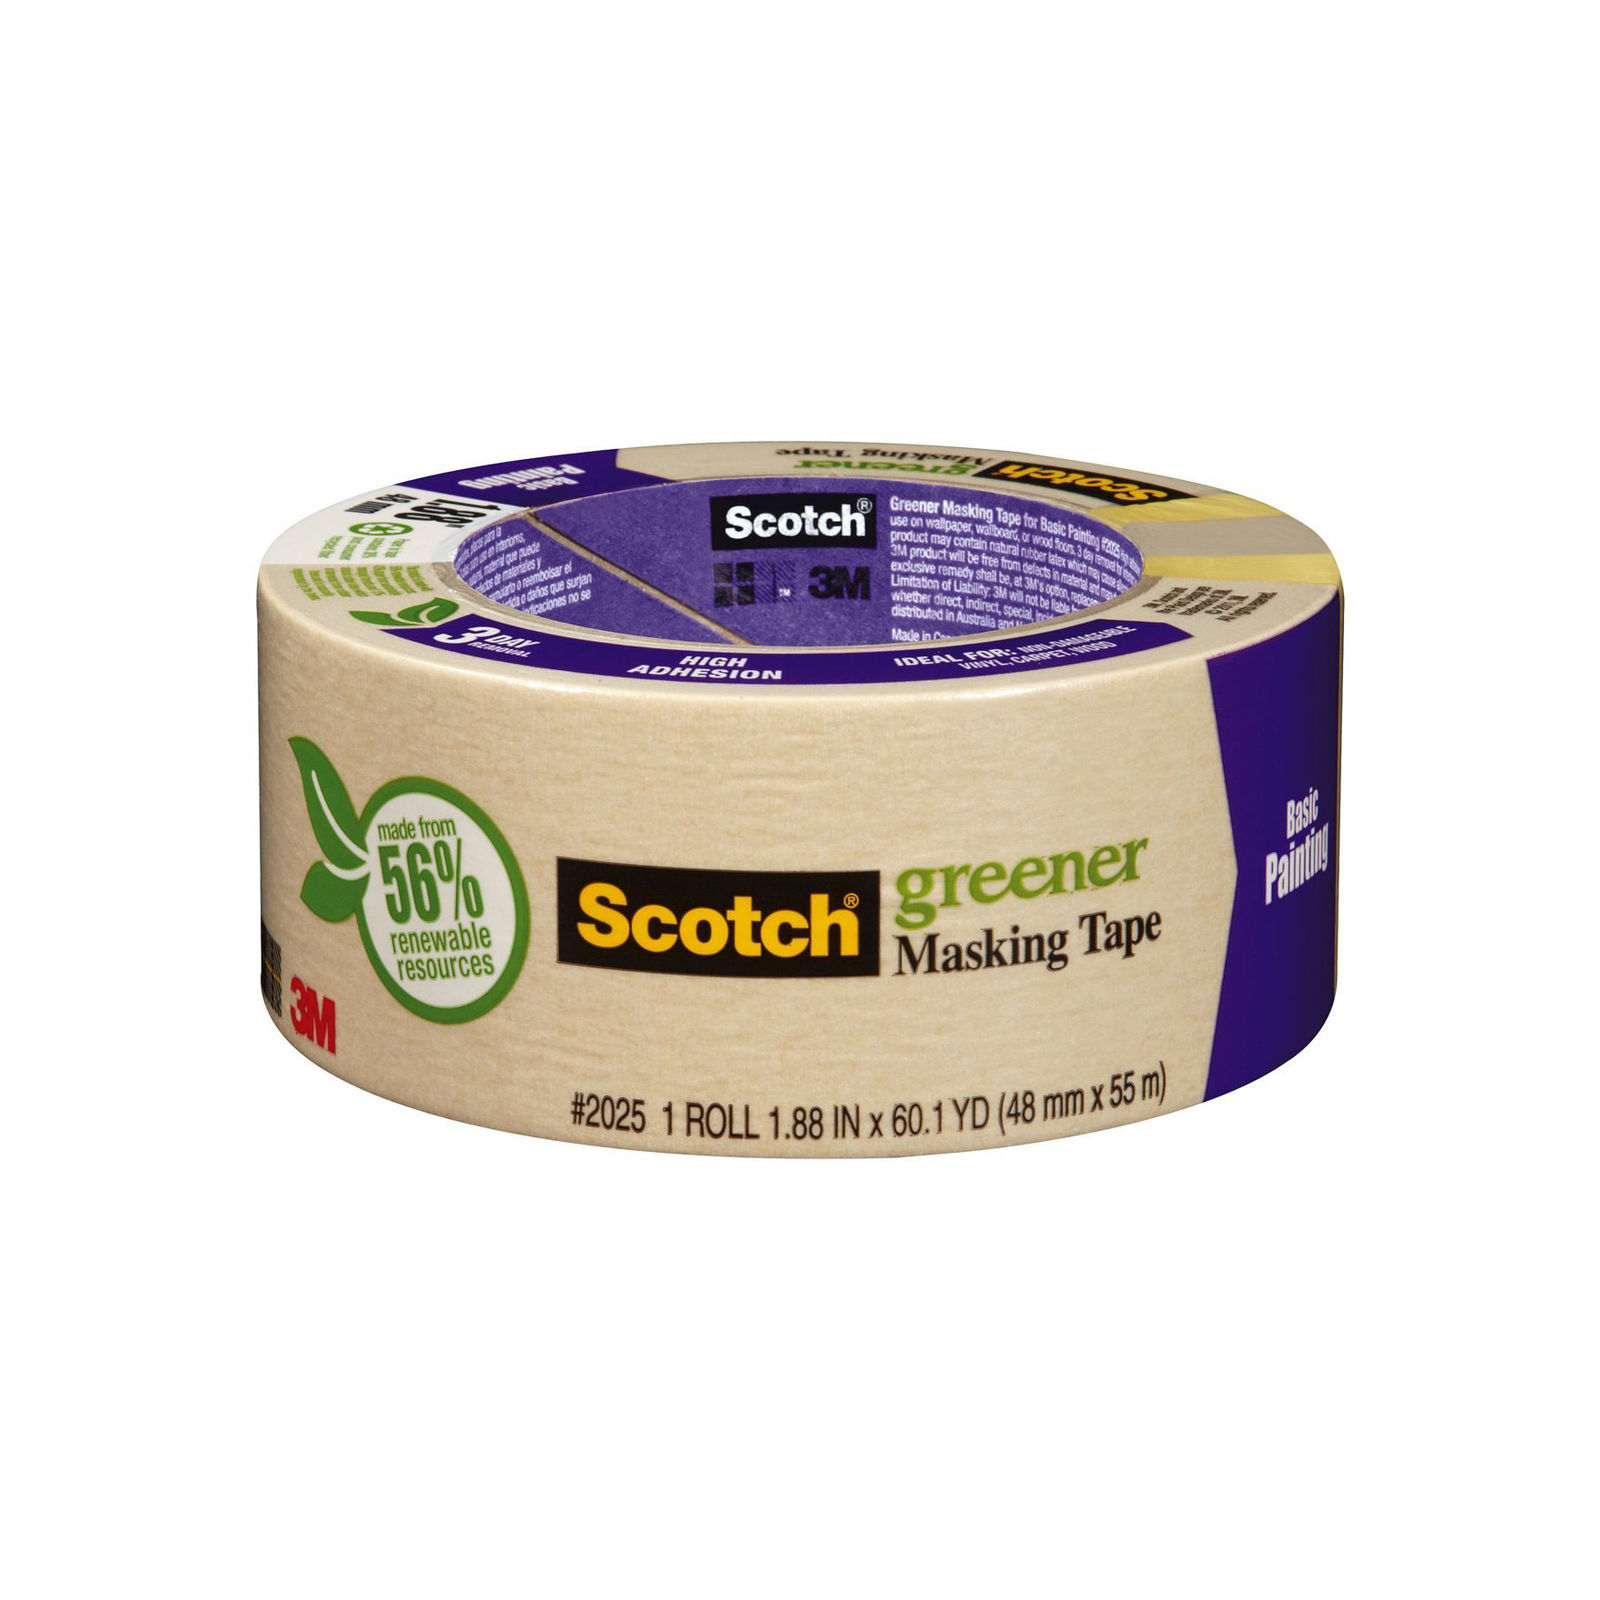 Scotch Masking Tape for Basic Painting, 1.88-Inch by 60.1-Yard